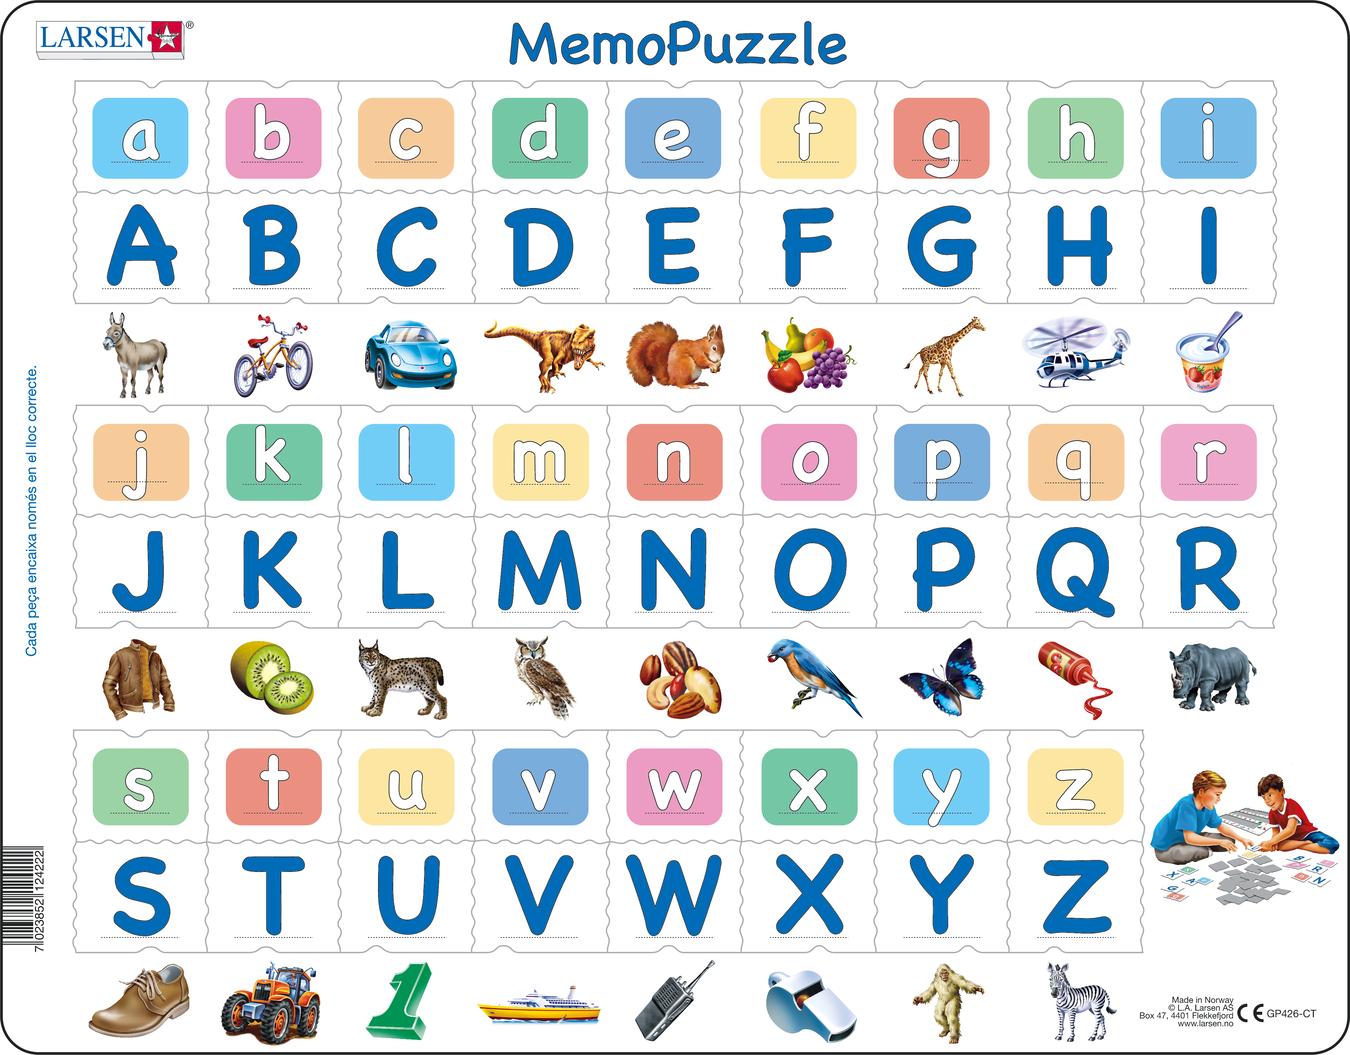 GP426 - MemoPuzzle: The Alphabet with 26 Upper and Lower Case Letters ...